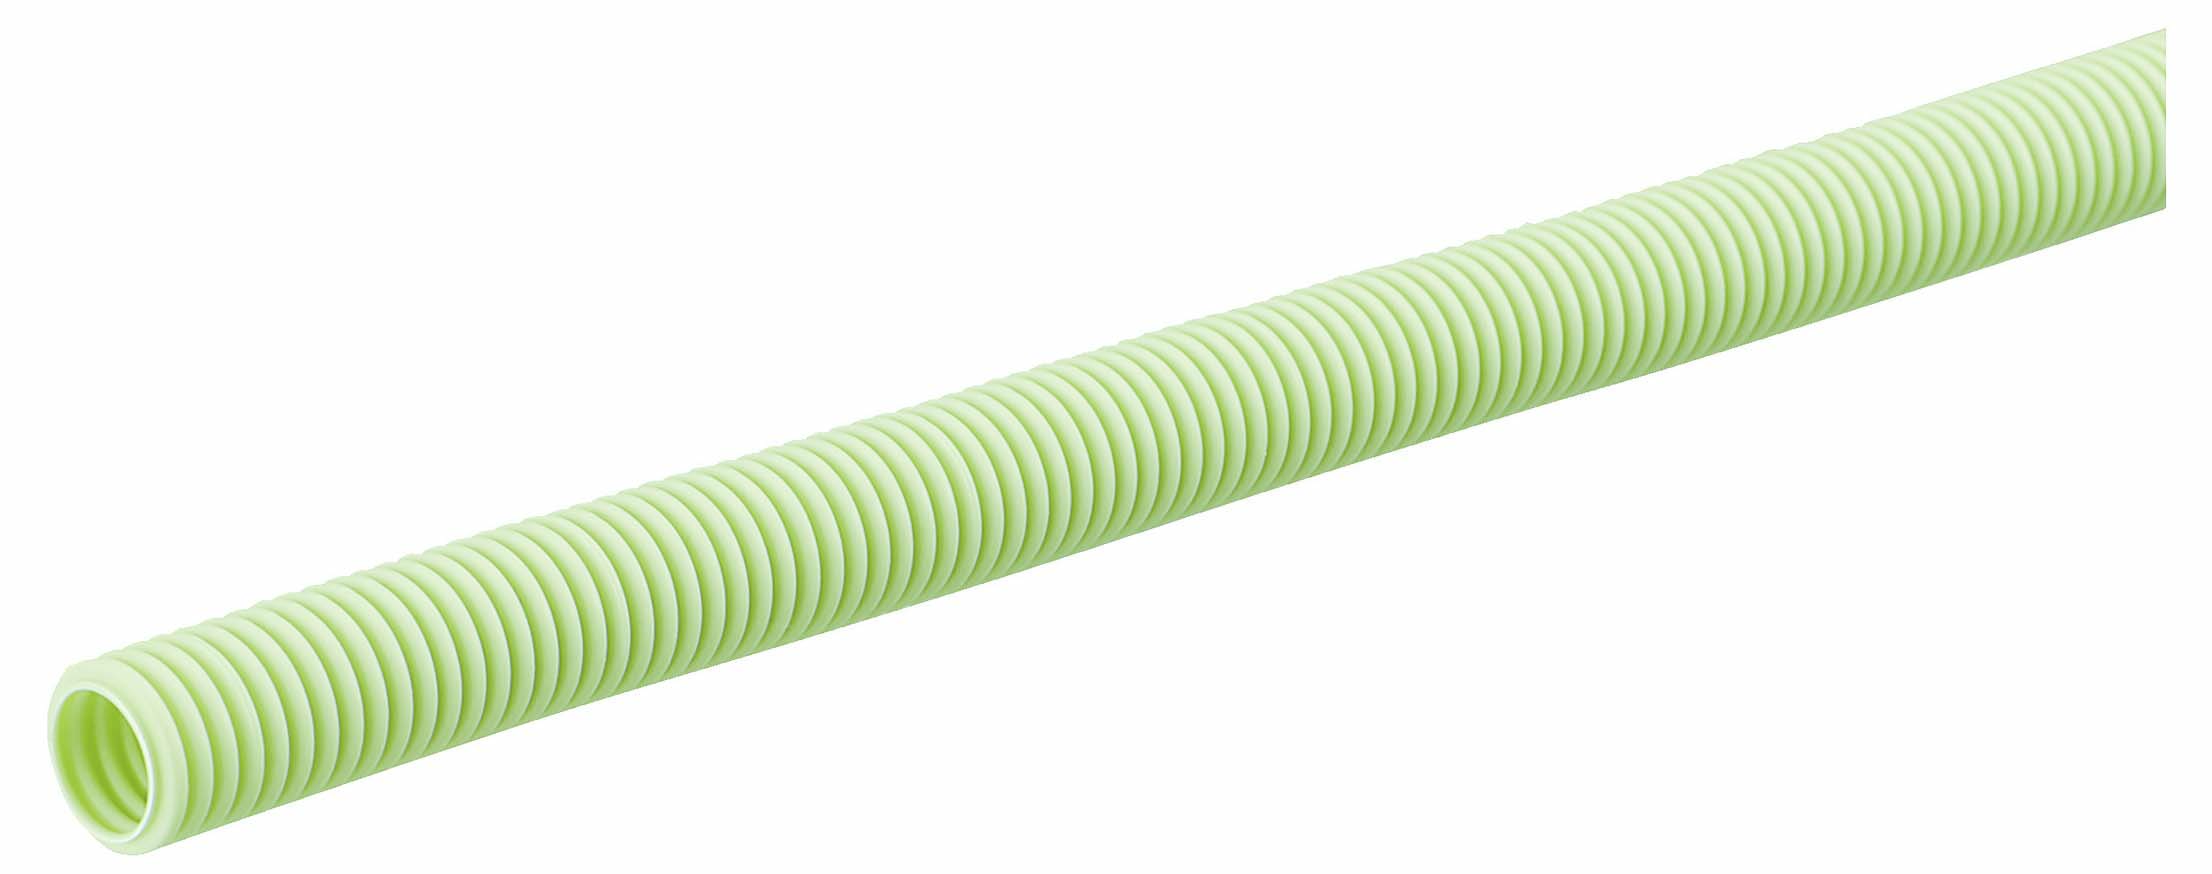 Cd Tube / Pf Tube / Flexible Tube (Flexible Tube Made Of Synthetic Resin) & Accessories Environmentally Friendly Em Series